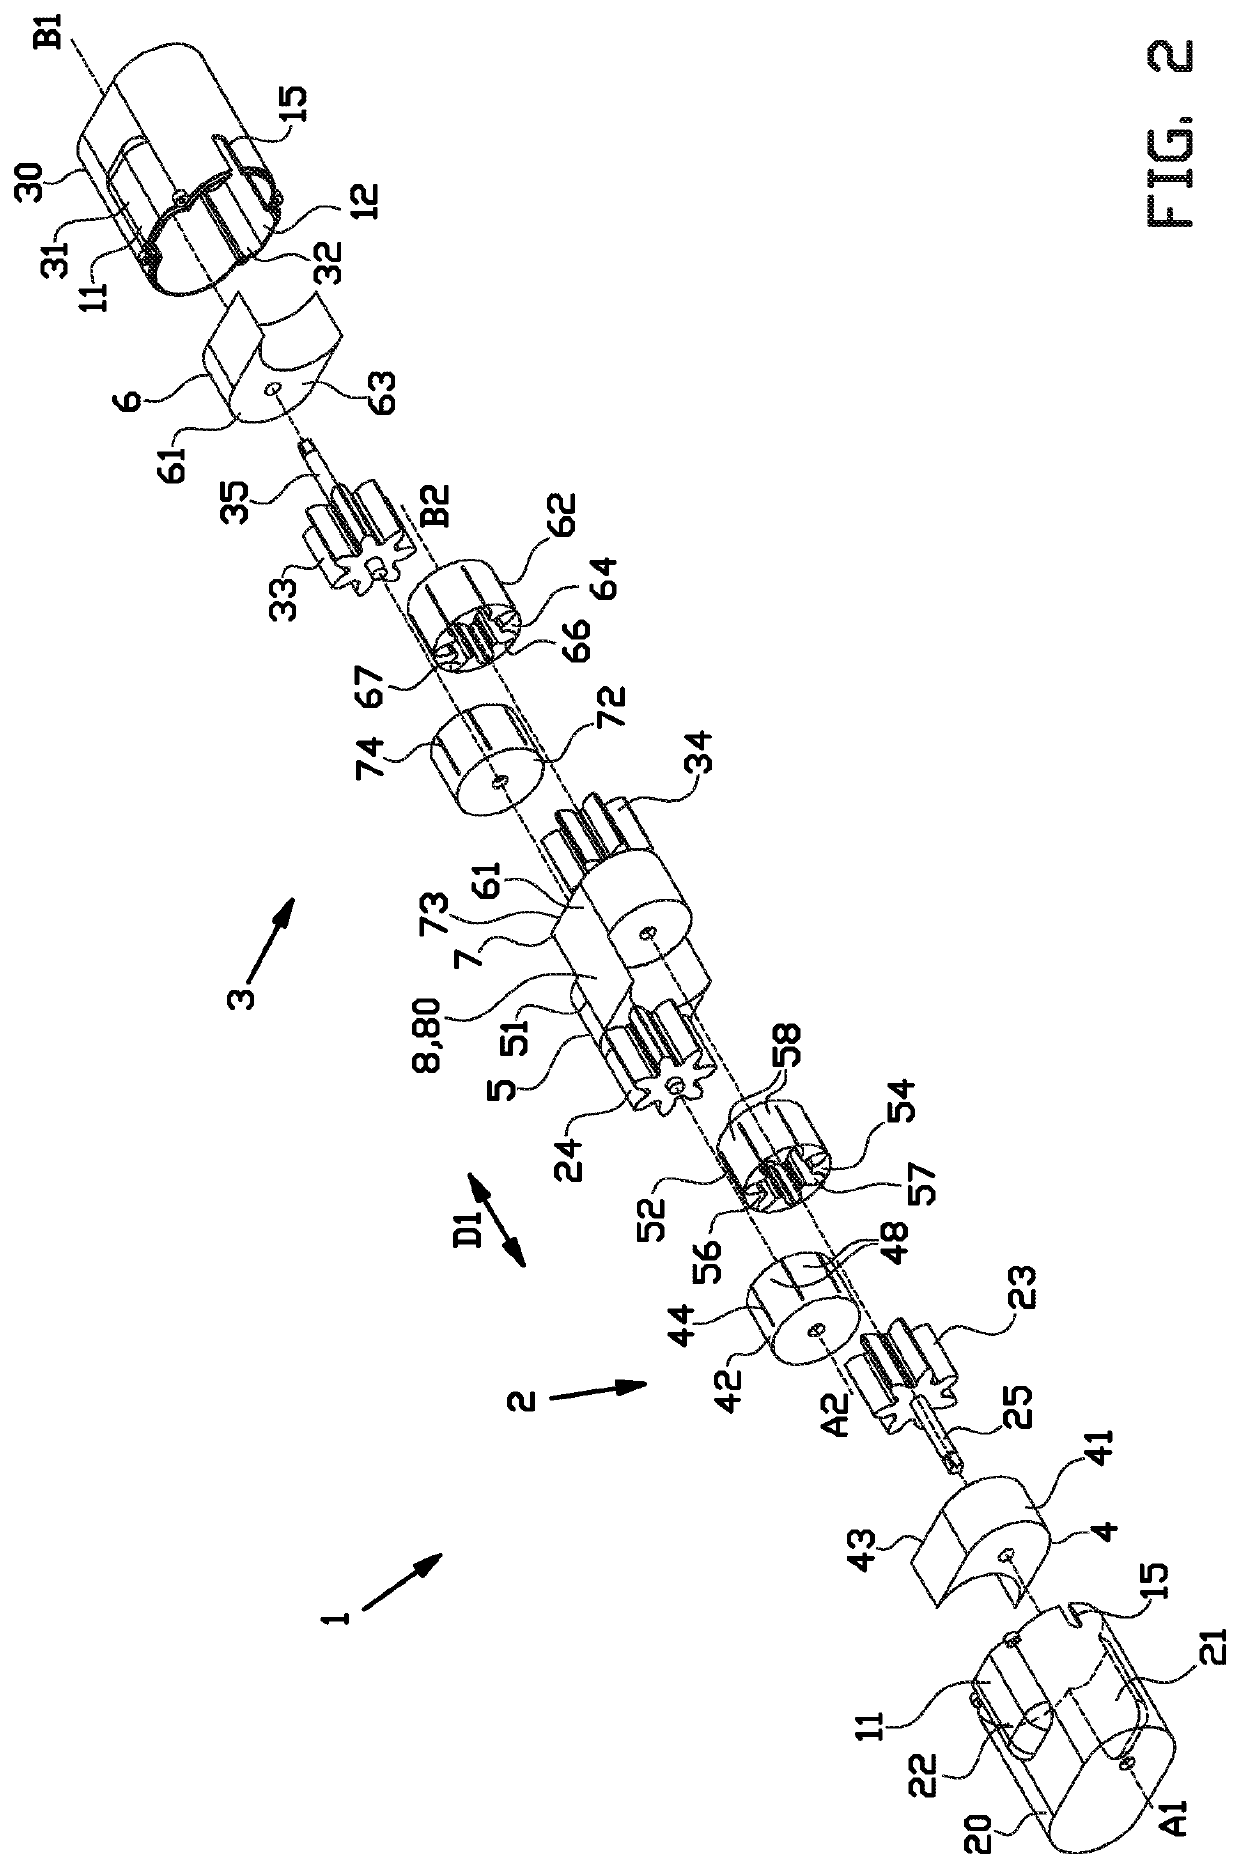 Continuously variable transmission and transmission system